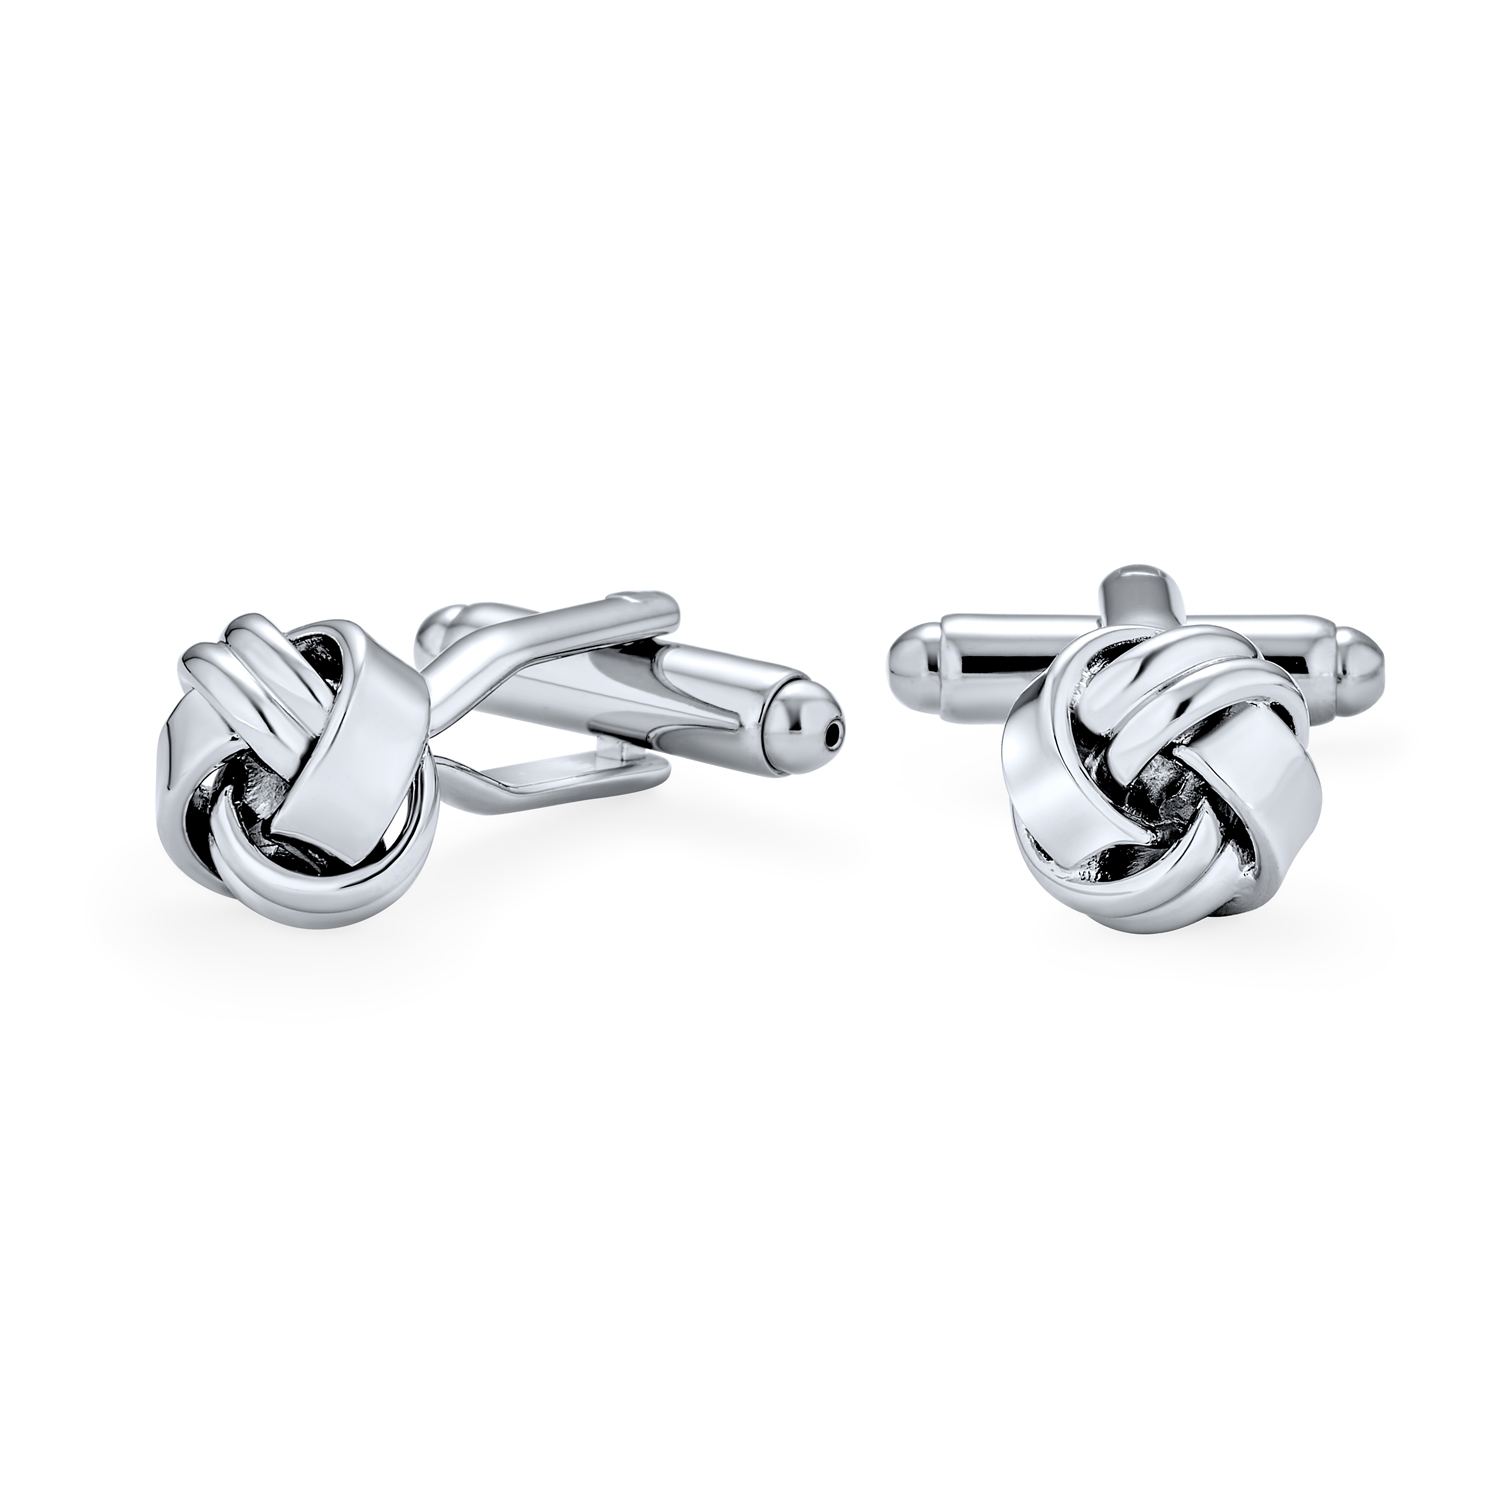 Bling Jewelry Signal Knot Woven Rope Braid Twist Shirt Cufflinks Stainless Steel - image 1 of 5